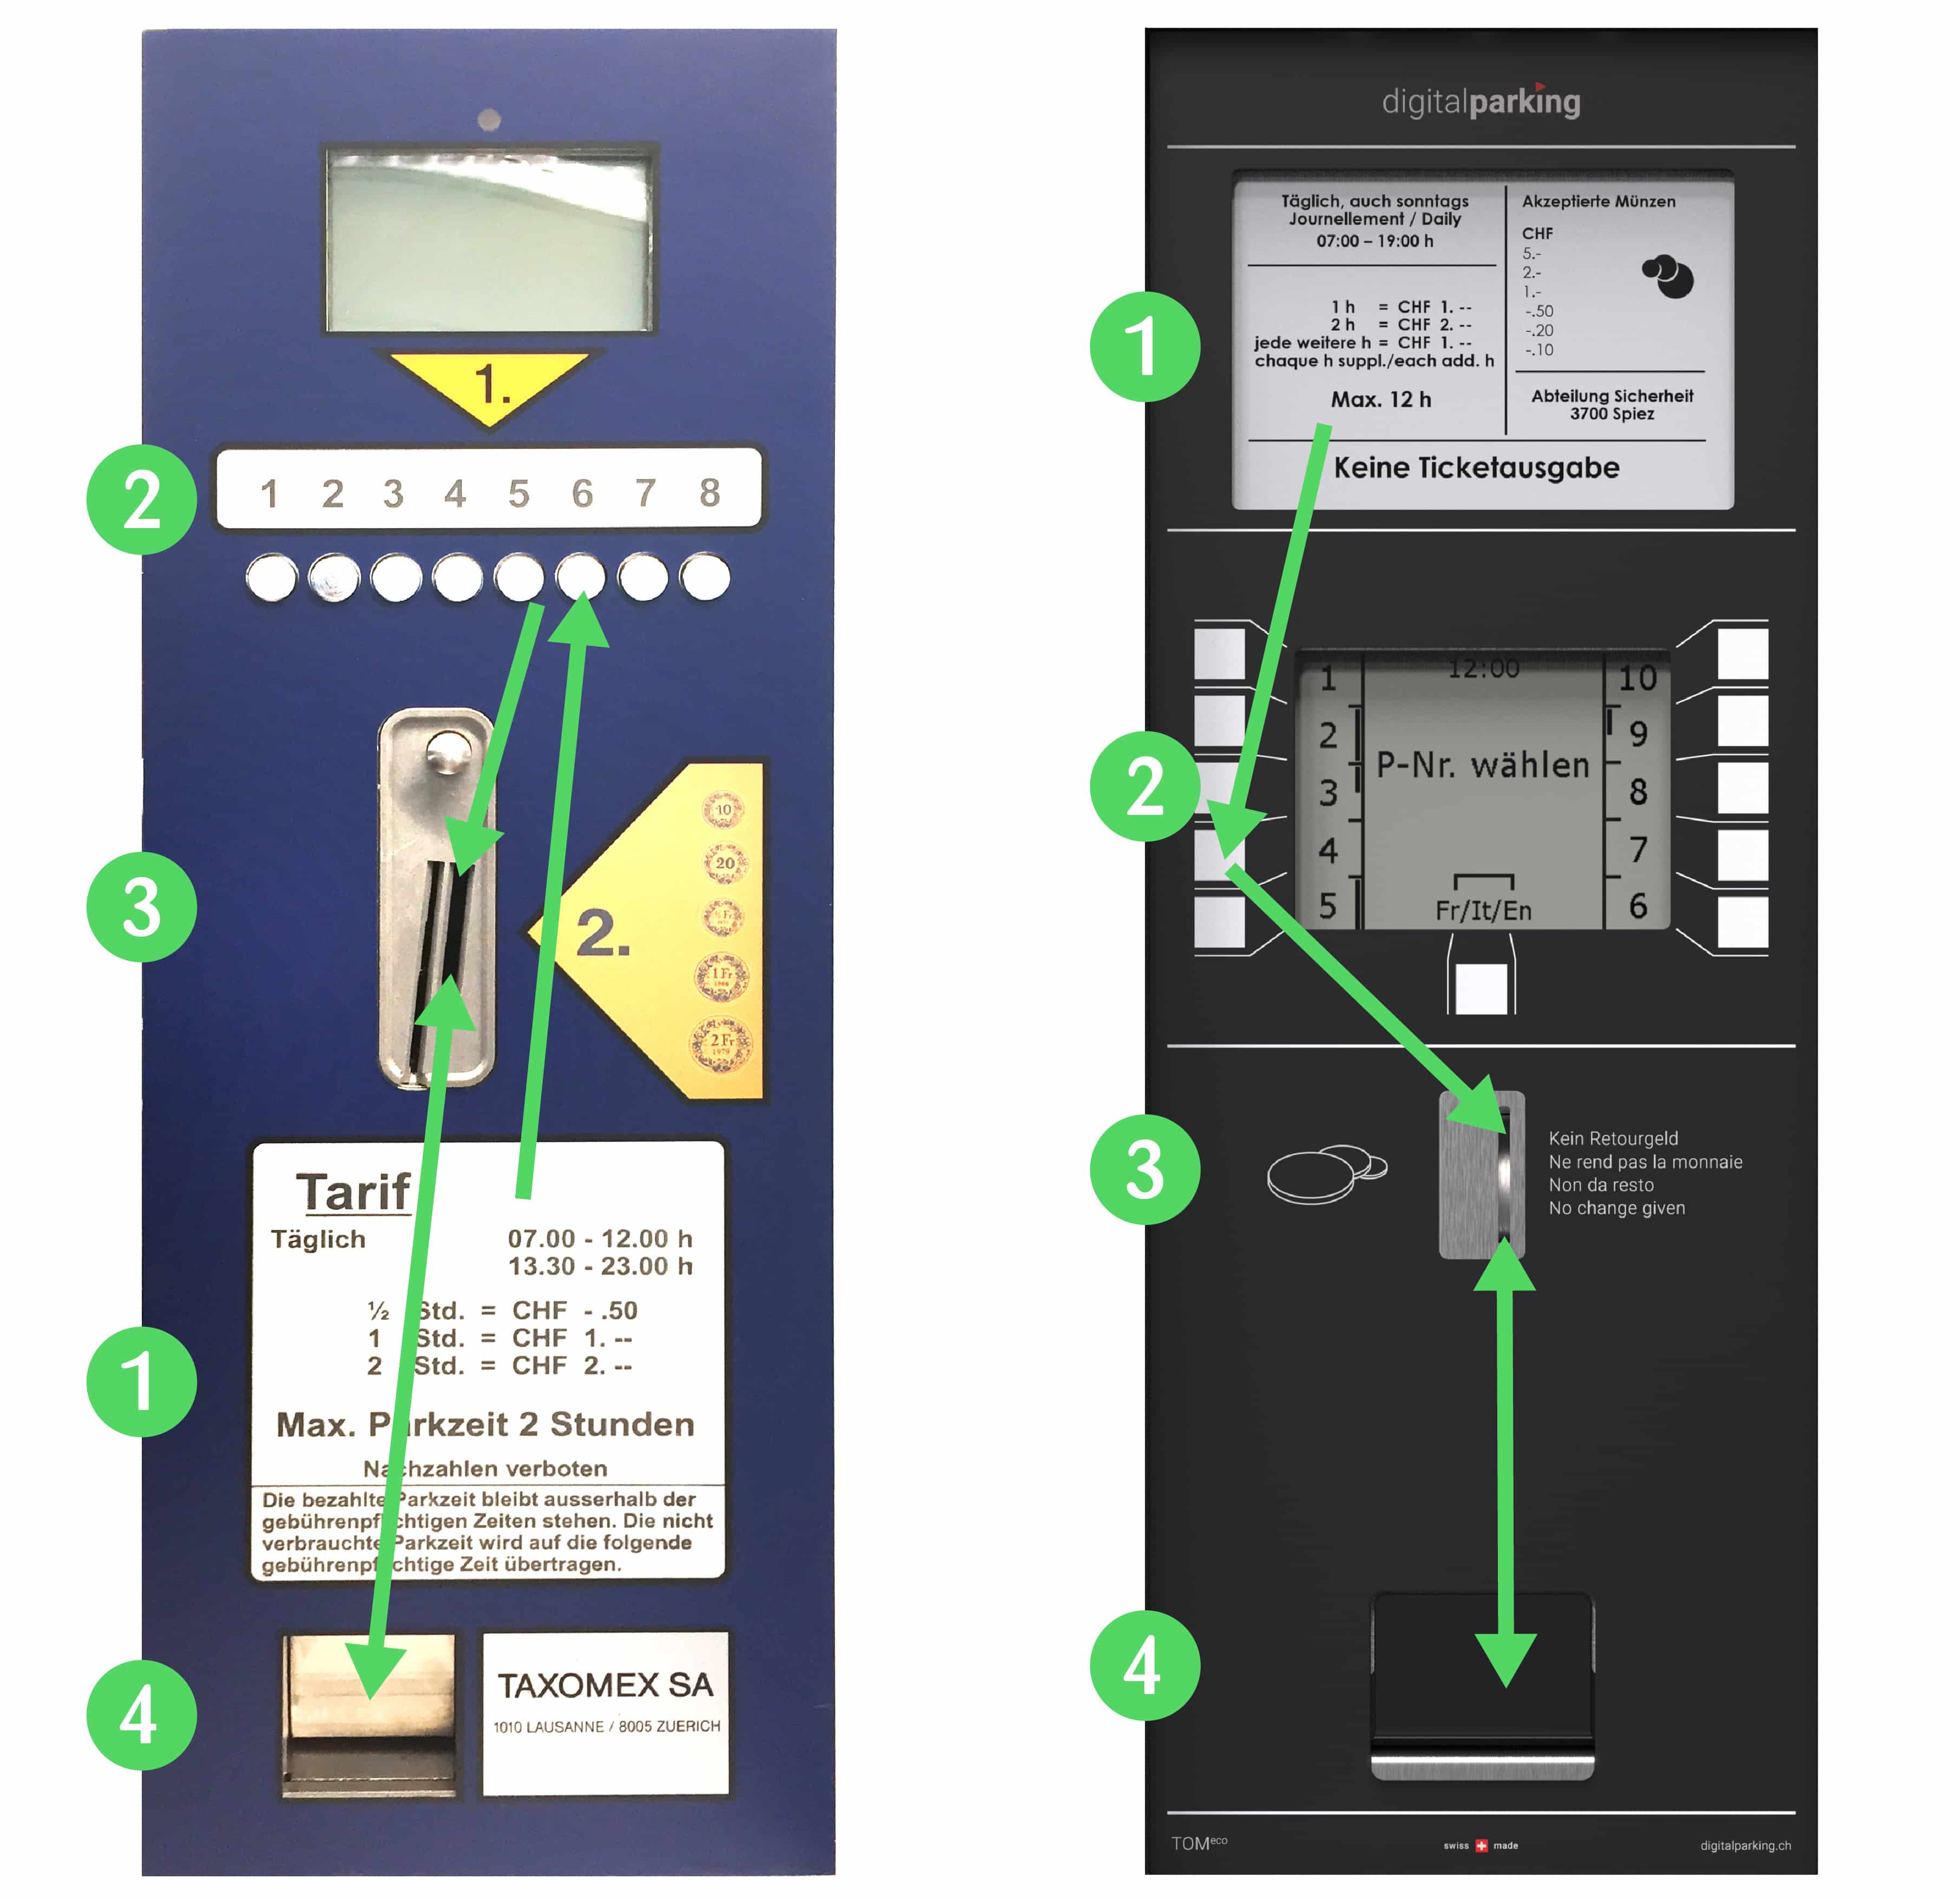 functional sample of the taxomx parking meter